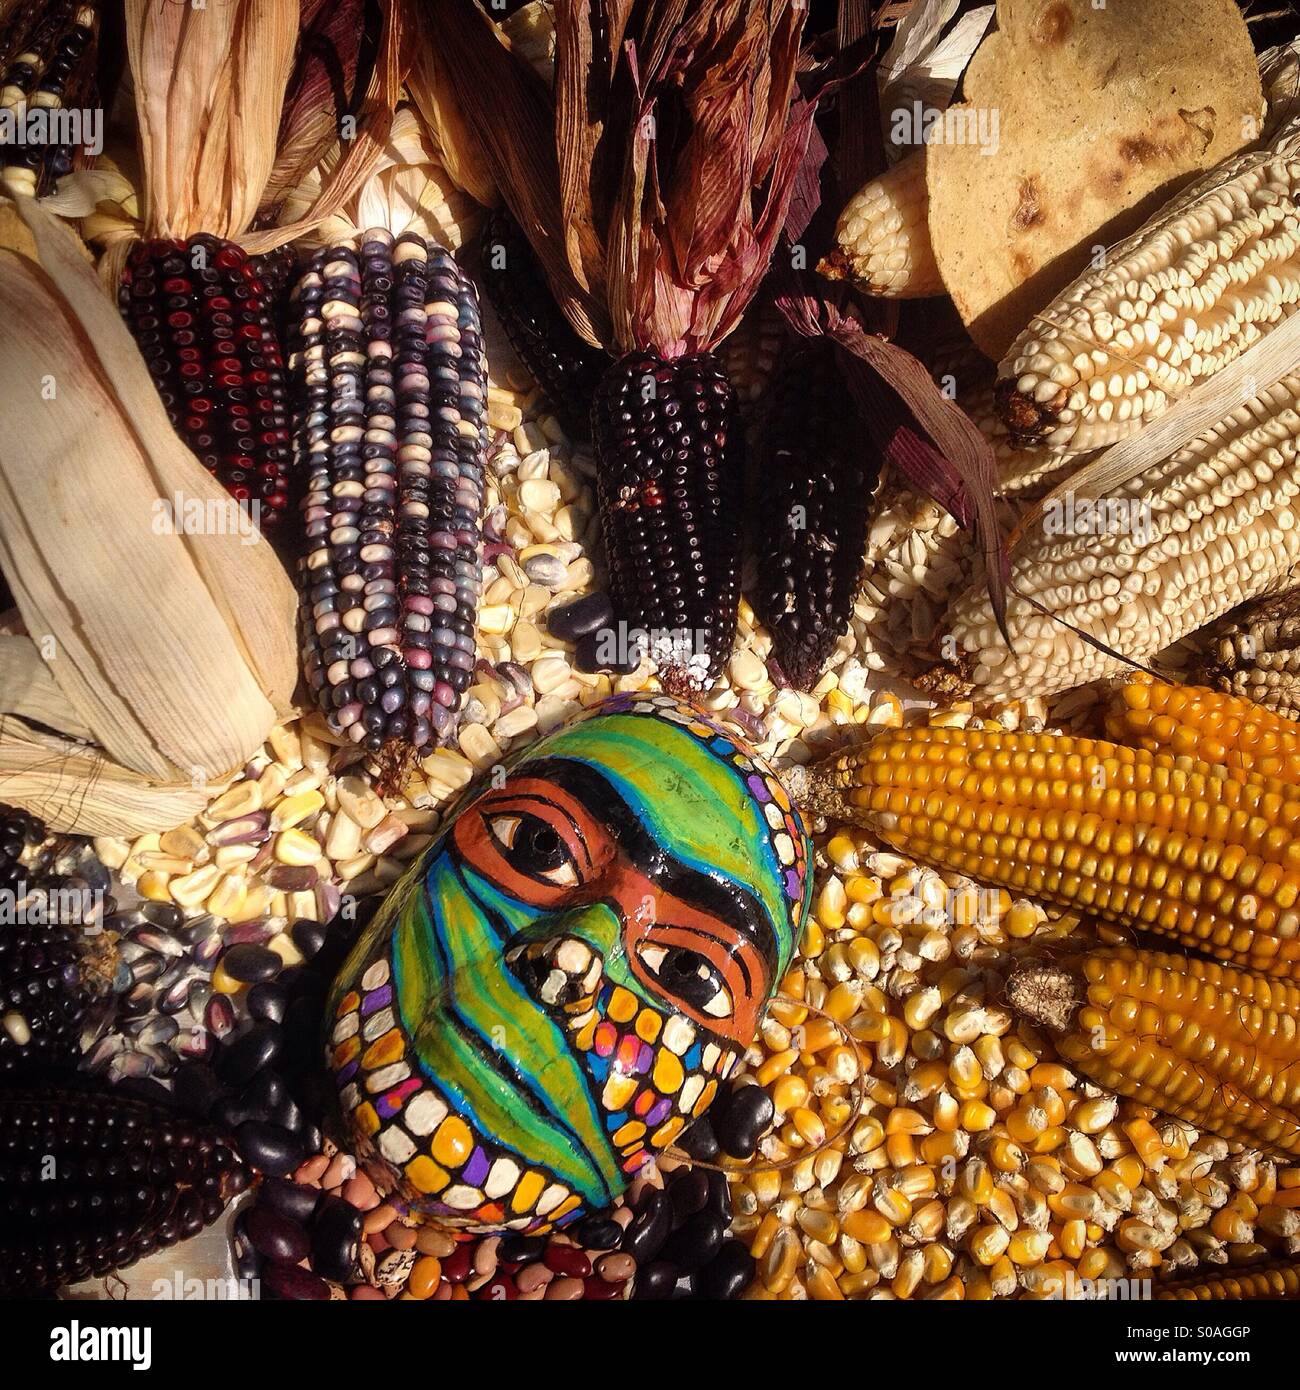 Folk art mask and corn cobs in the seeds bank of organic farmer Tomás Villanueva in Tepetlixpa, Mexico State, Mexico. GMO seeds are threatening to contaminate native varieties of corn in México. Stock Photo